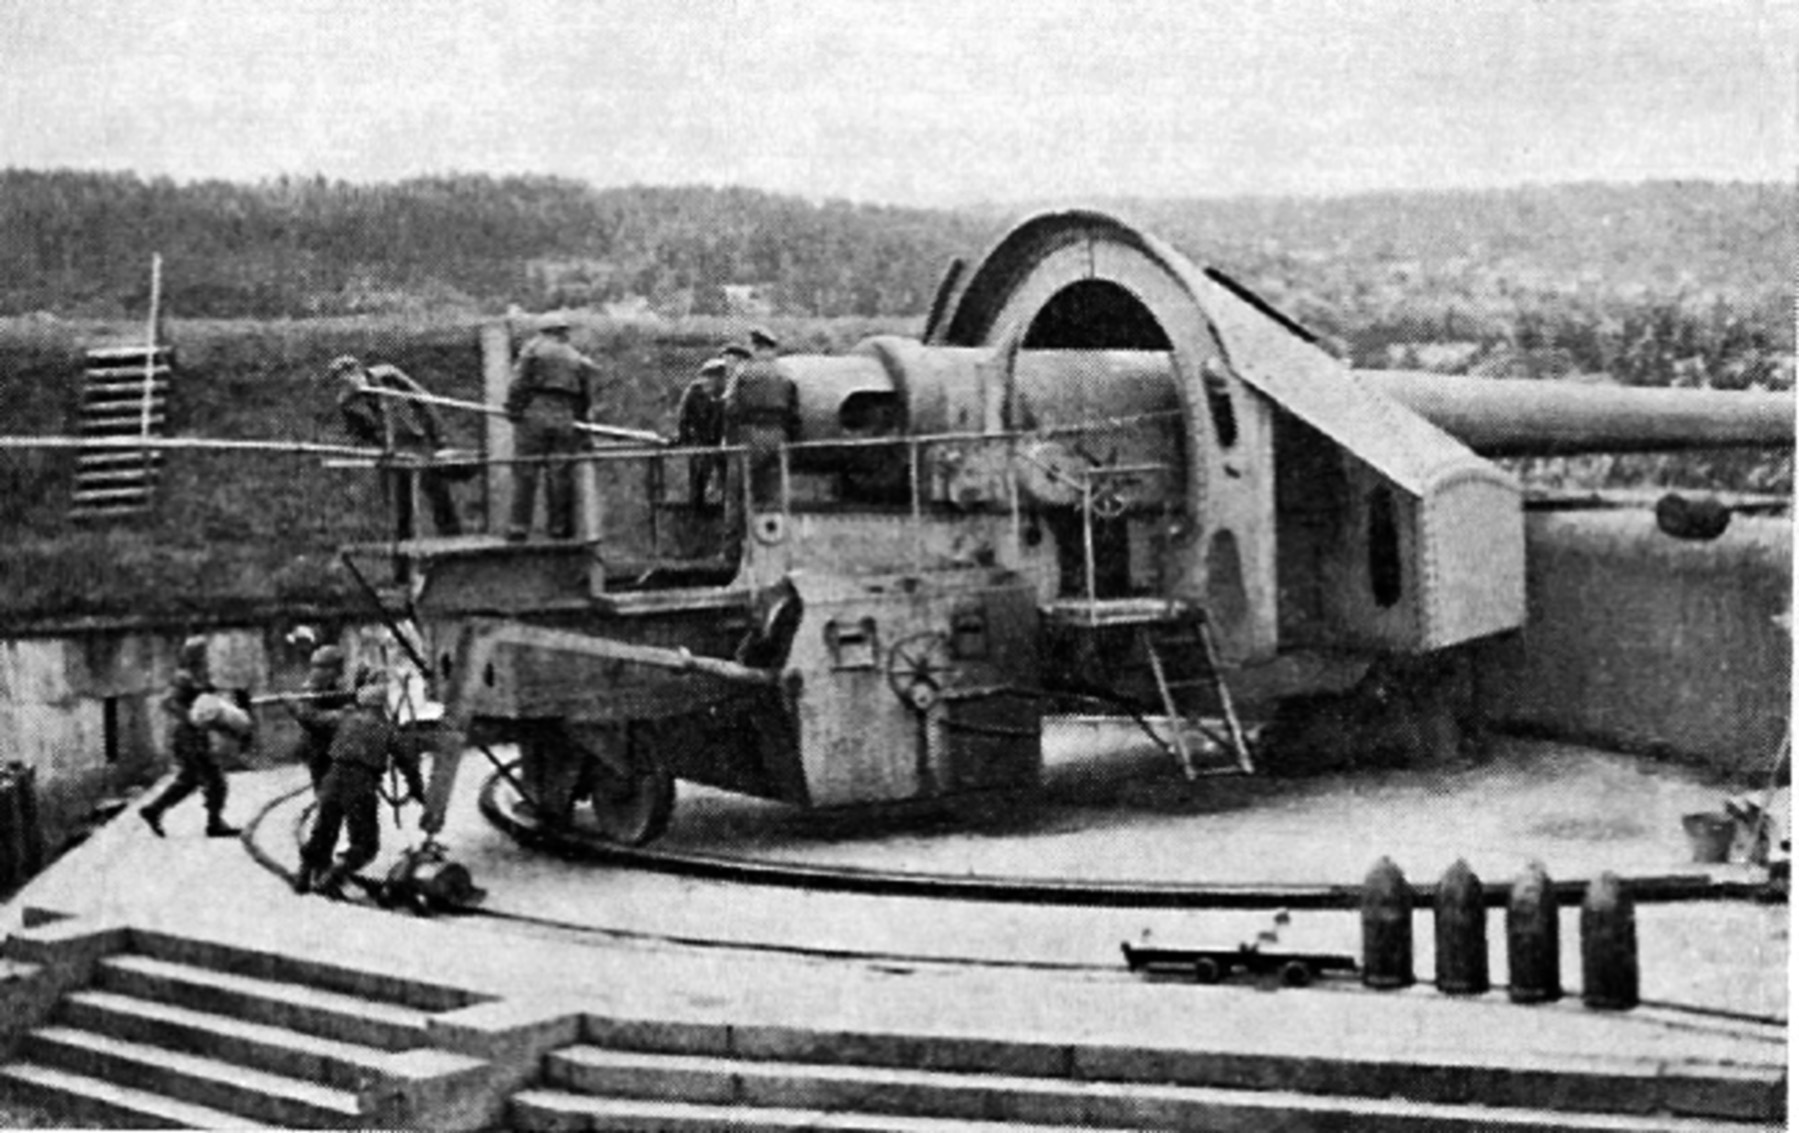 One of the gigantic 280mm guns used by the Norwegians to devastate the Blücher is shown in position at the Oscarborg Fortress. The crew was required to service the gun during the running battle without the benefit of protective cover.